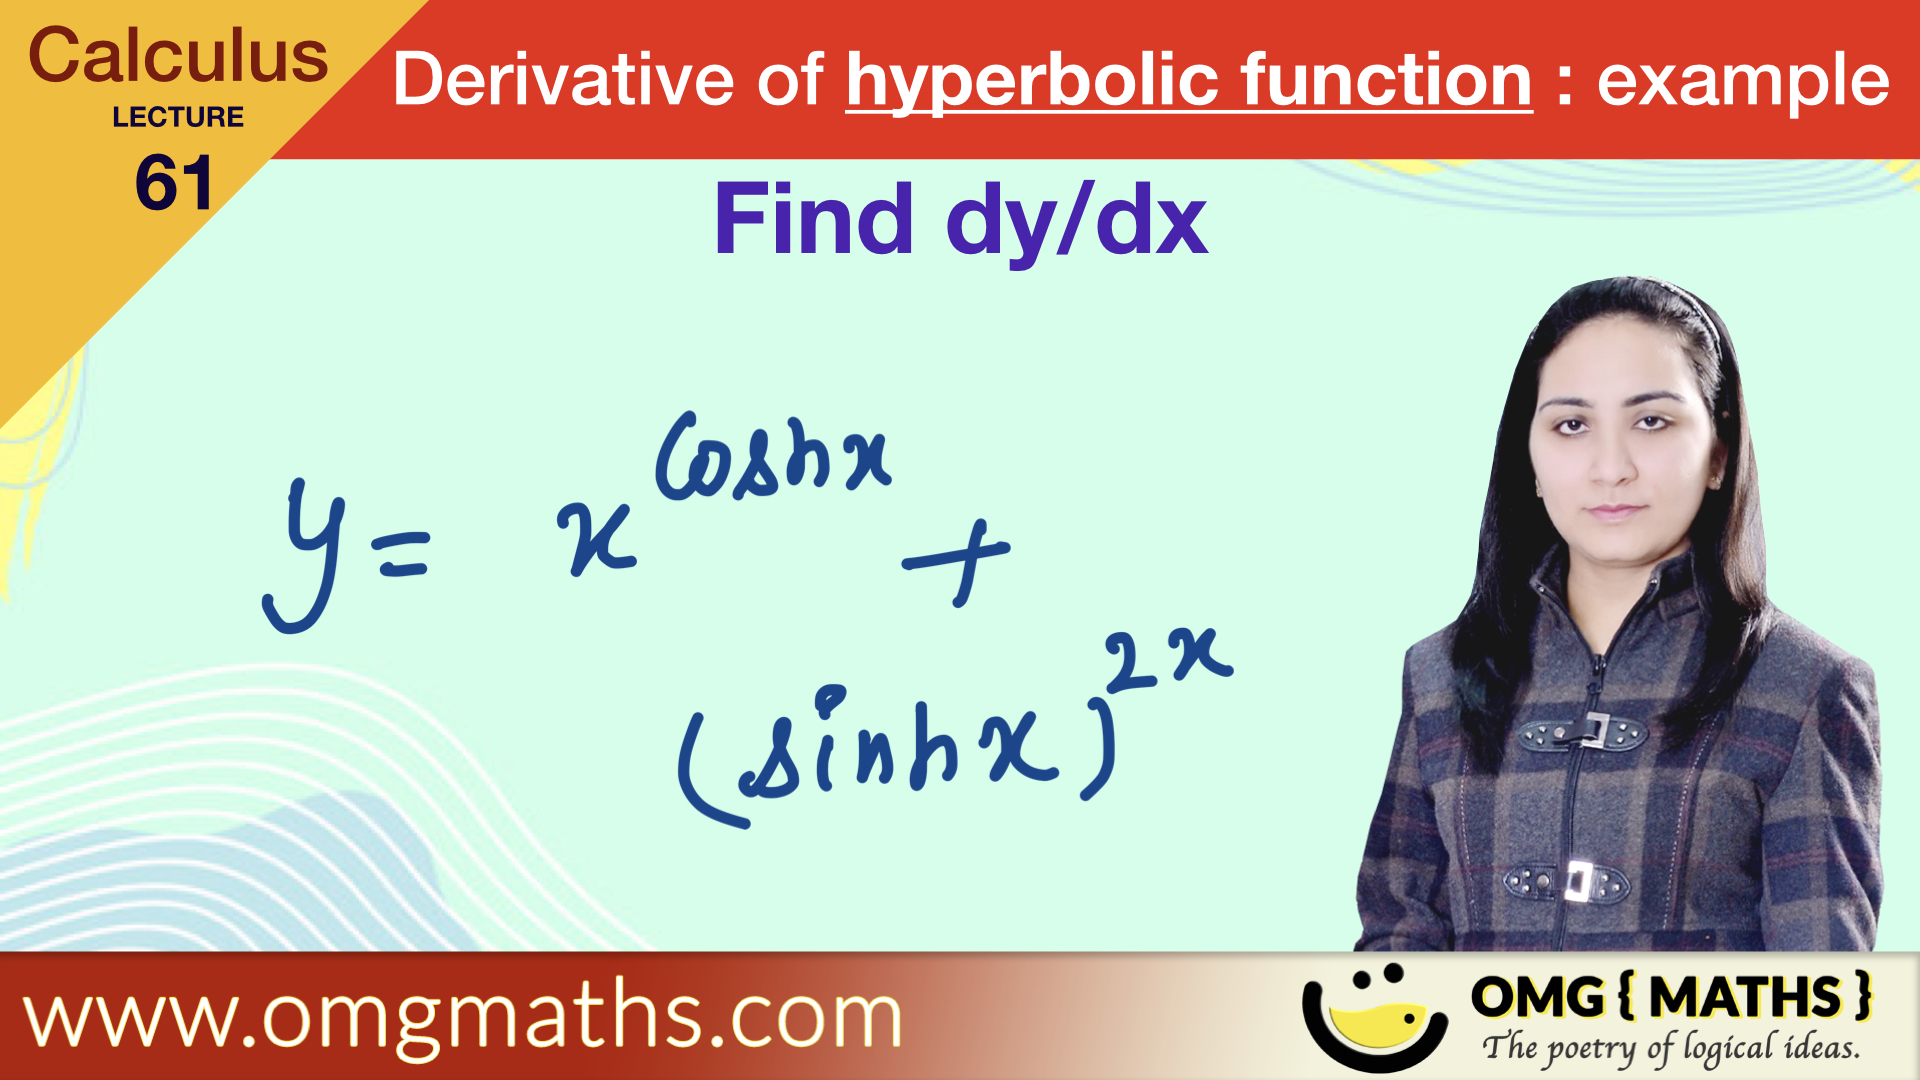 Derivative of Inverse hyperbolic function Example 16 pdf | Bsc | BA | calculus 1 | Differentiation